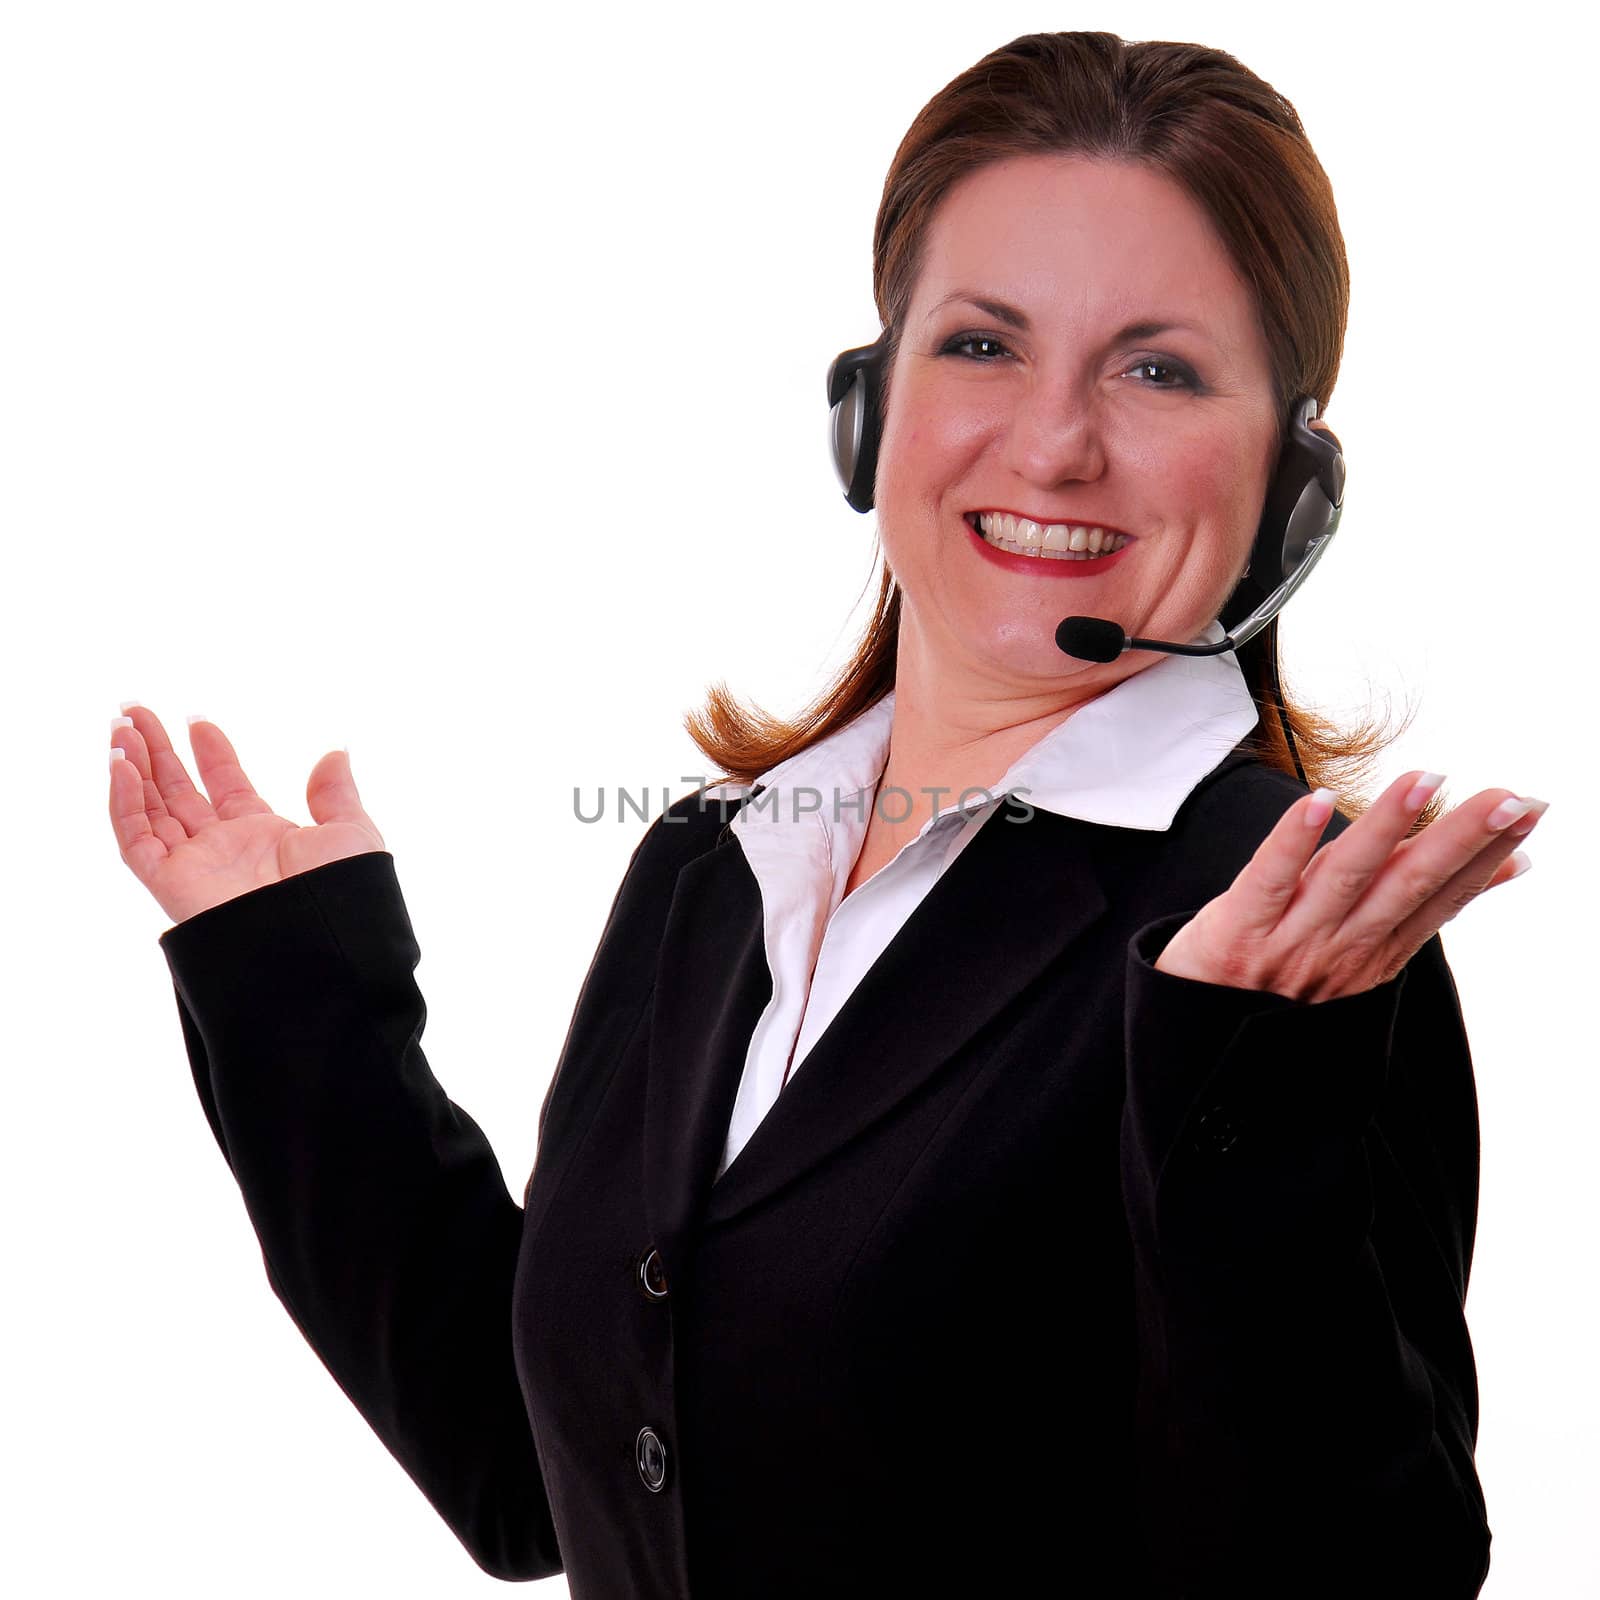 Pretty woman wearing headset smiling - over a white background.